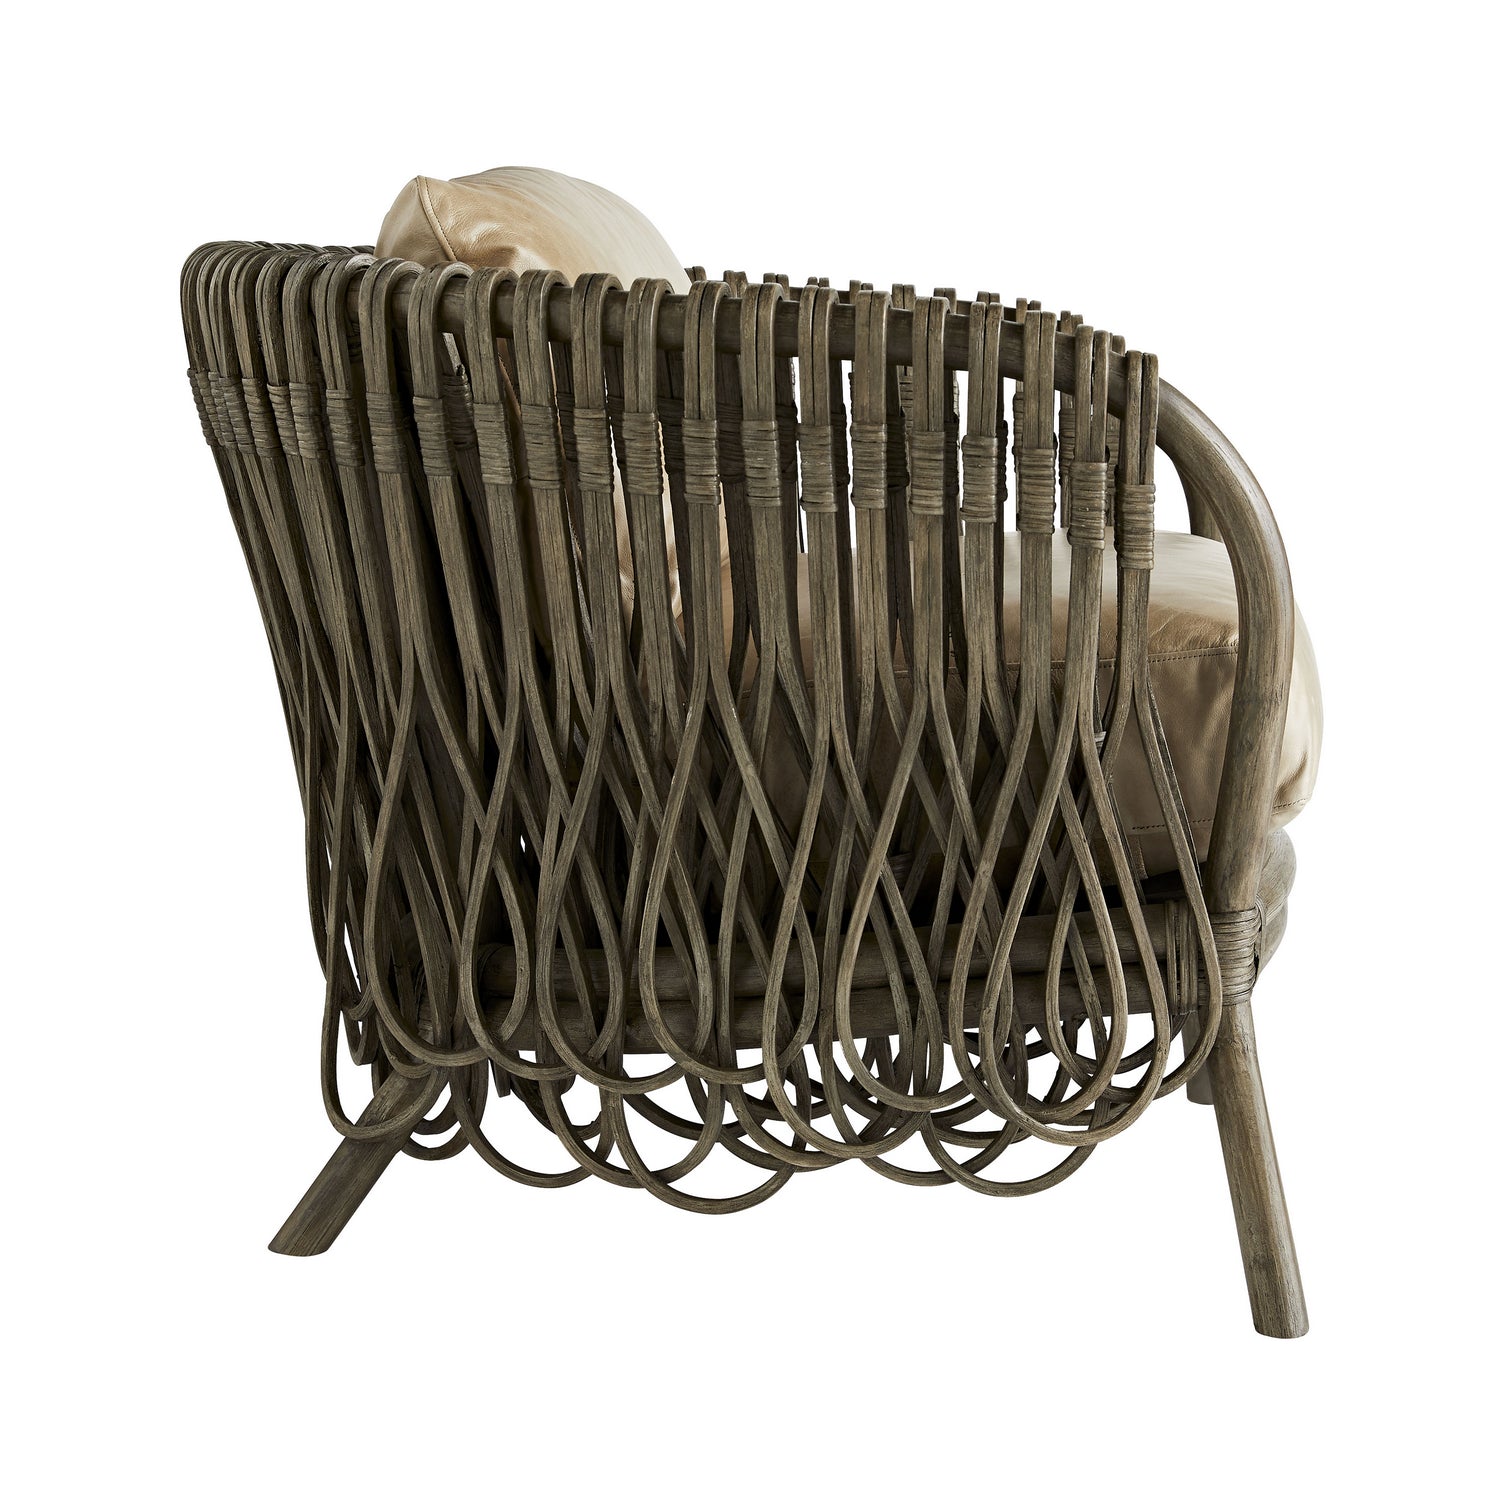 Chair from the Strata collection in Gray Wash finish